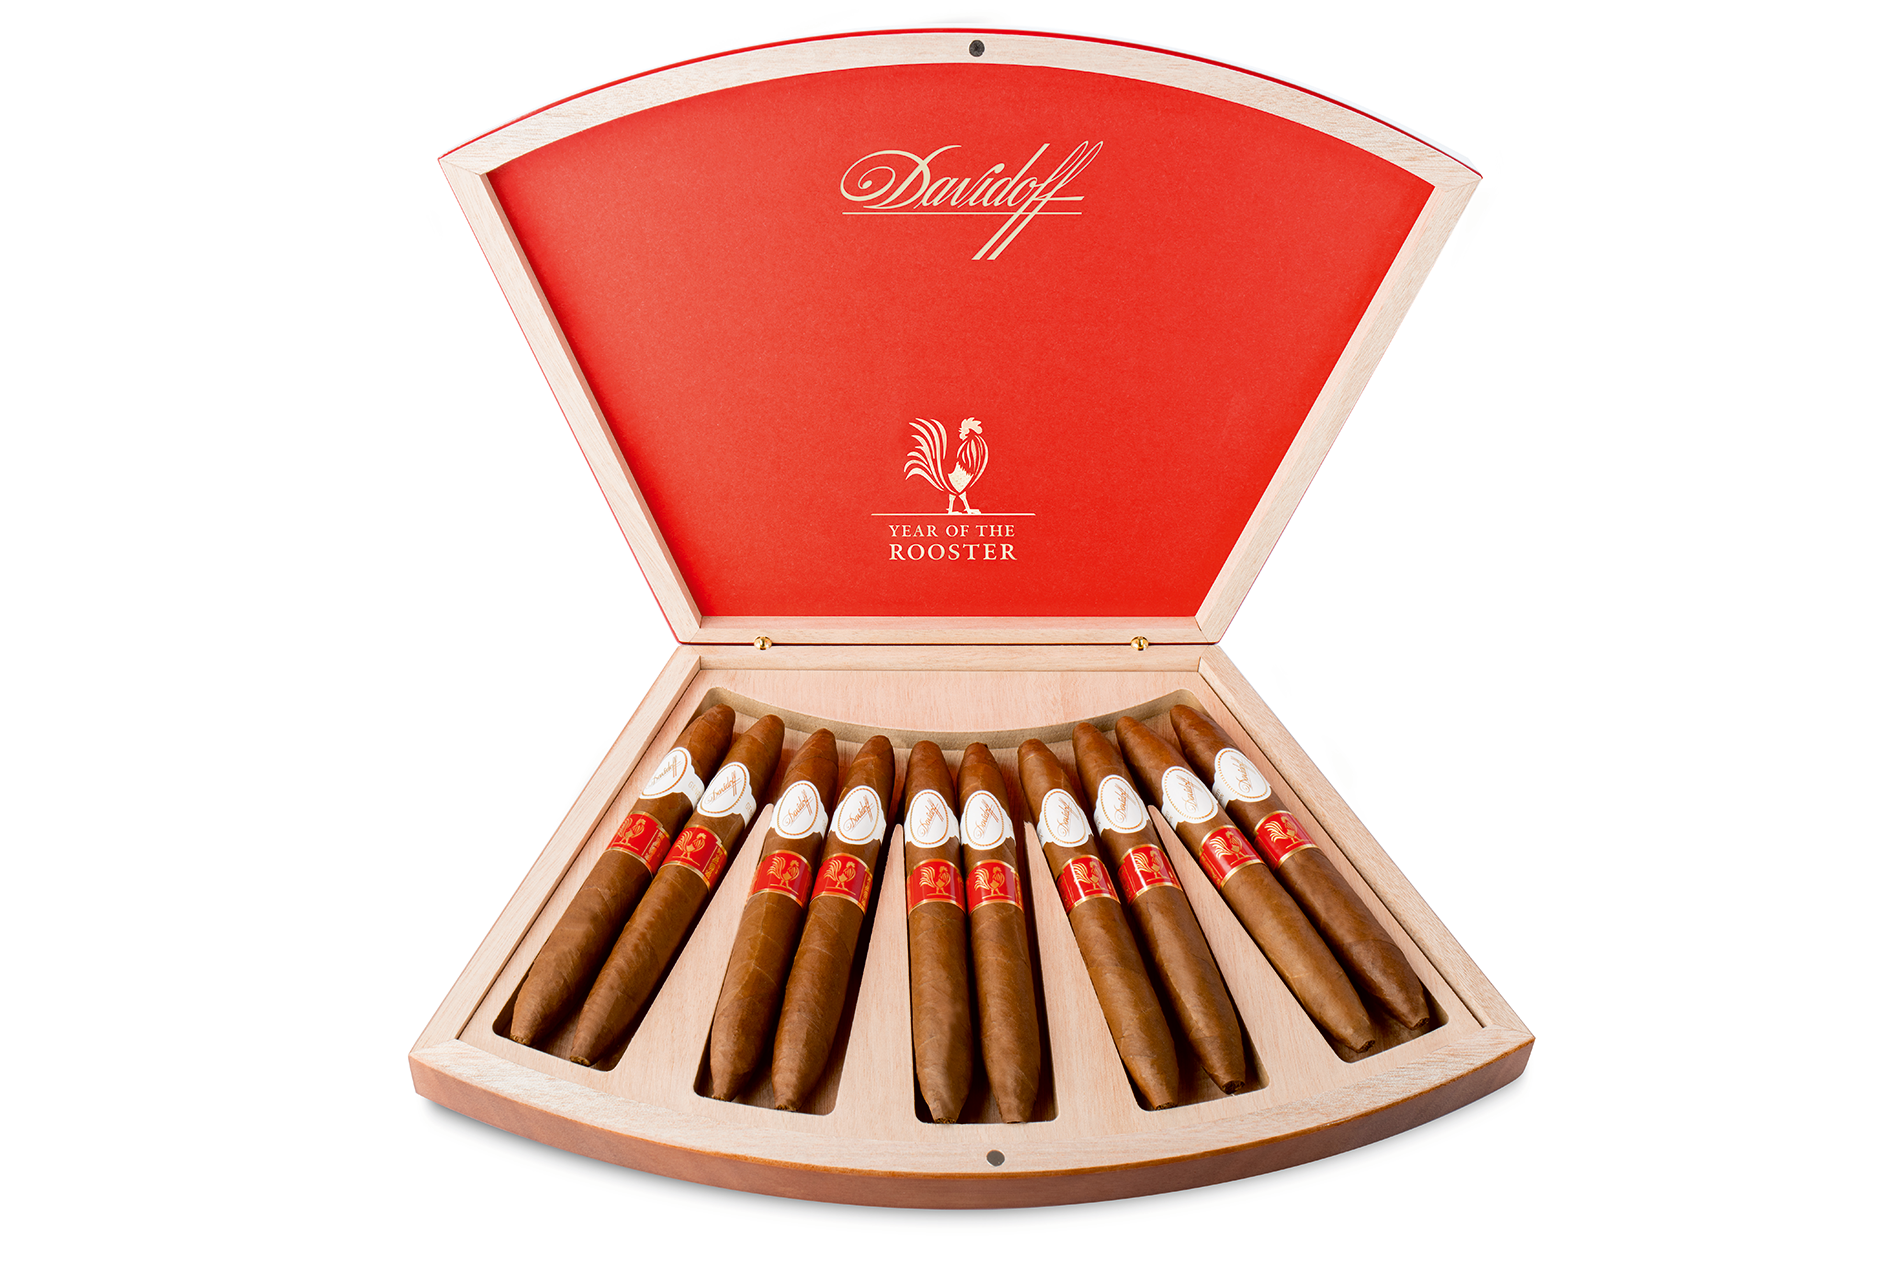 Davidoff-Year-of-the-Rooster-Box-003-feature.png